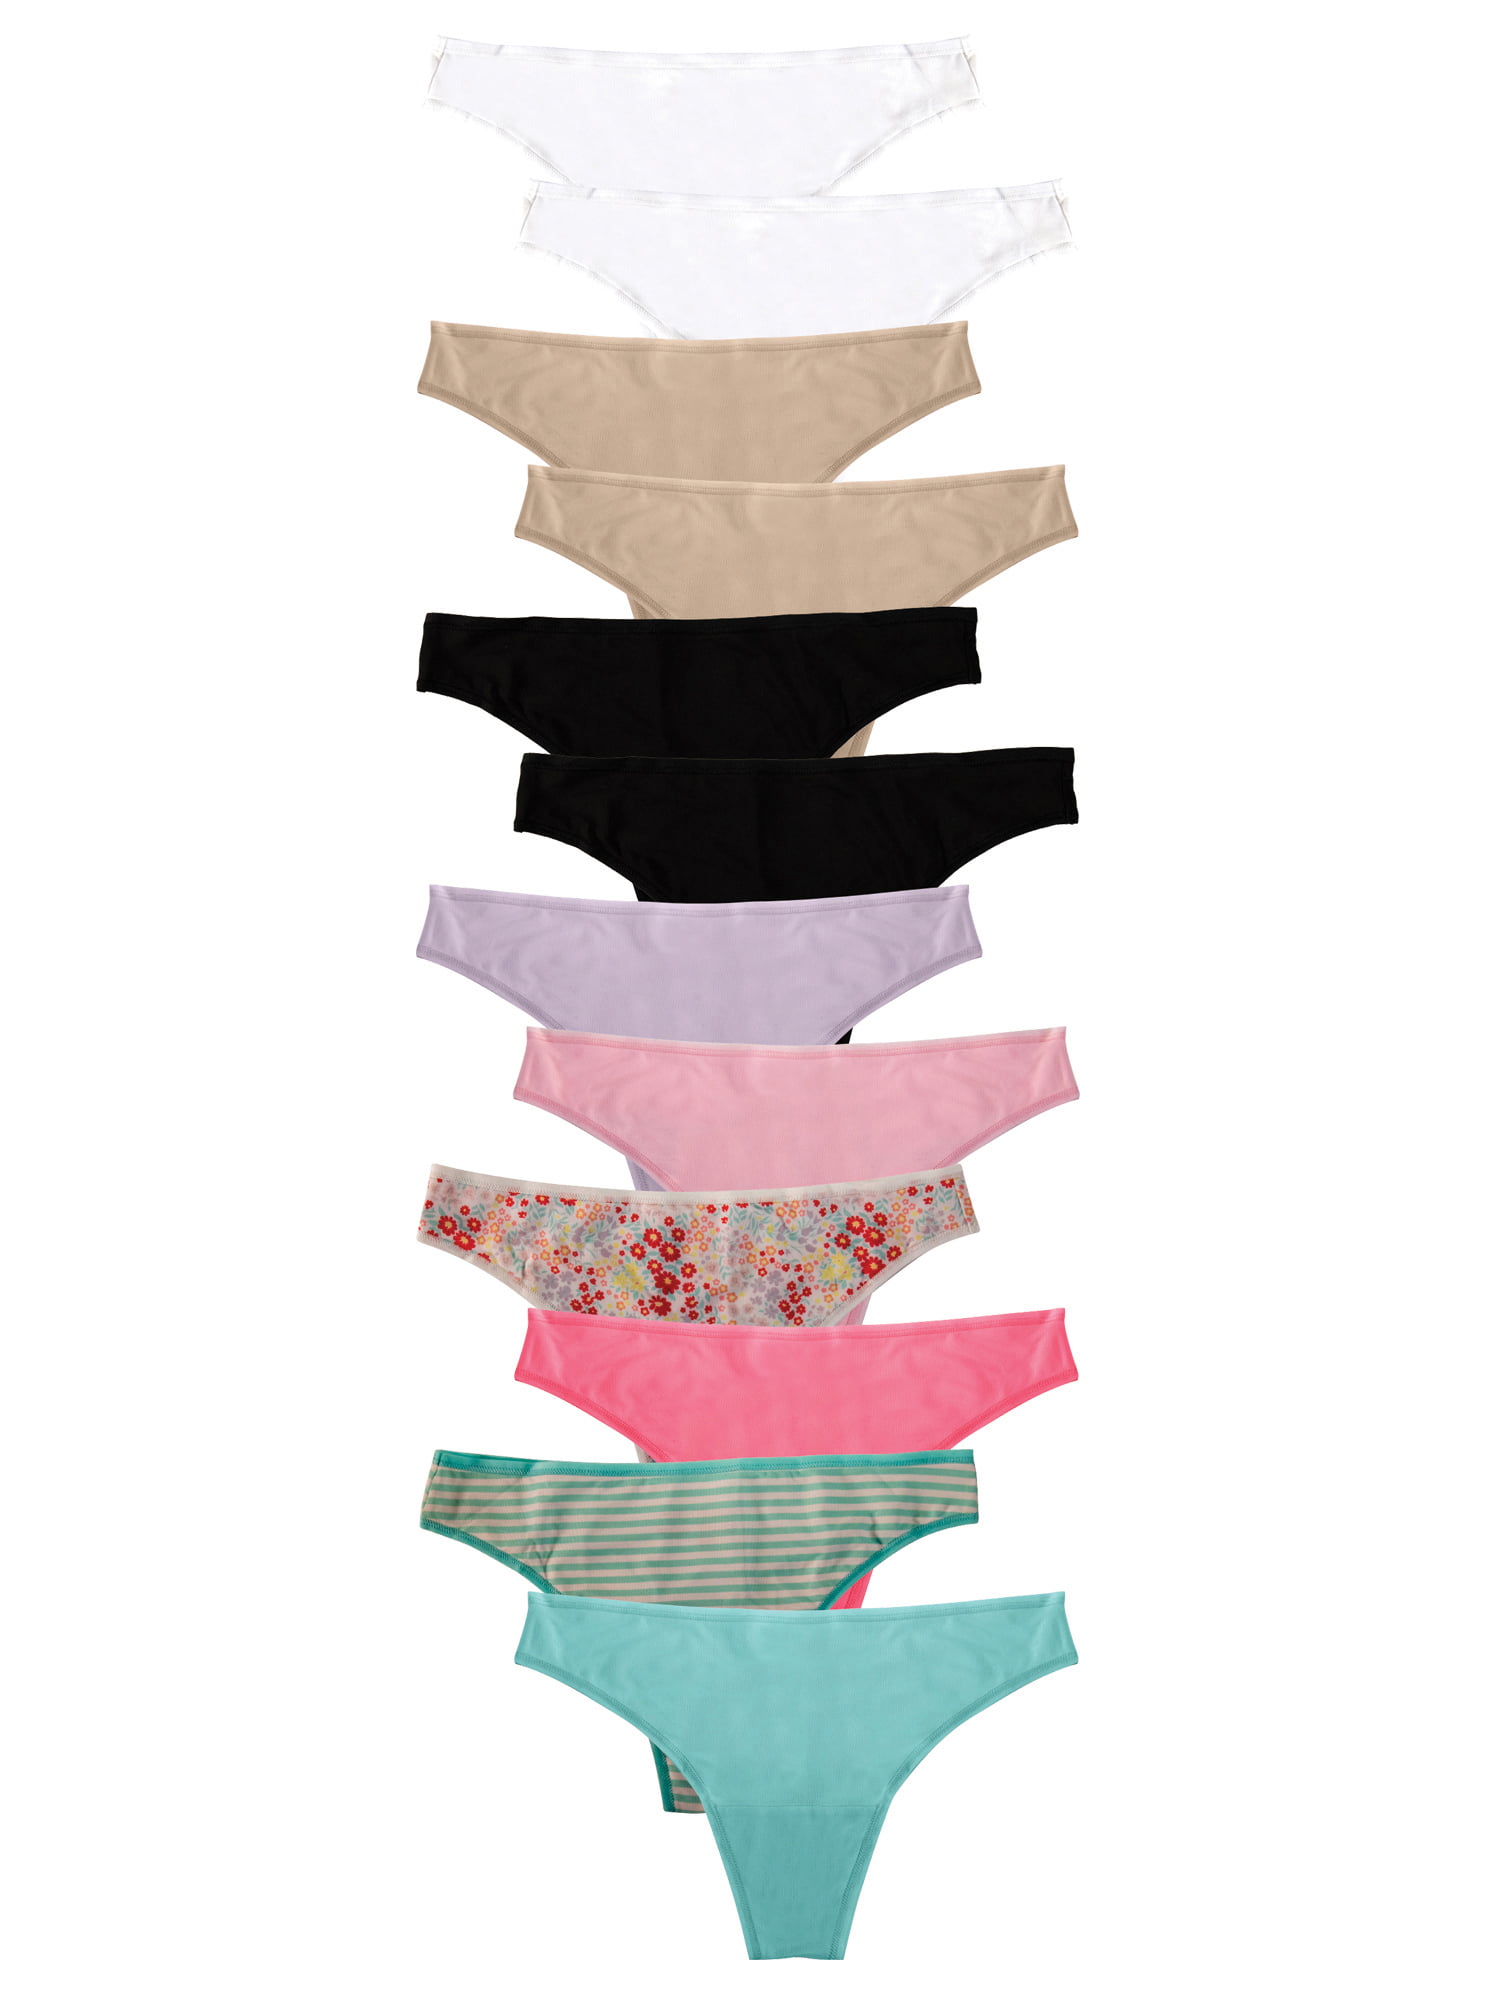 Secret Treasures Thong Silhouette Polyester Spandex Panty (Women's) 12 Pack  